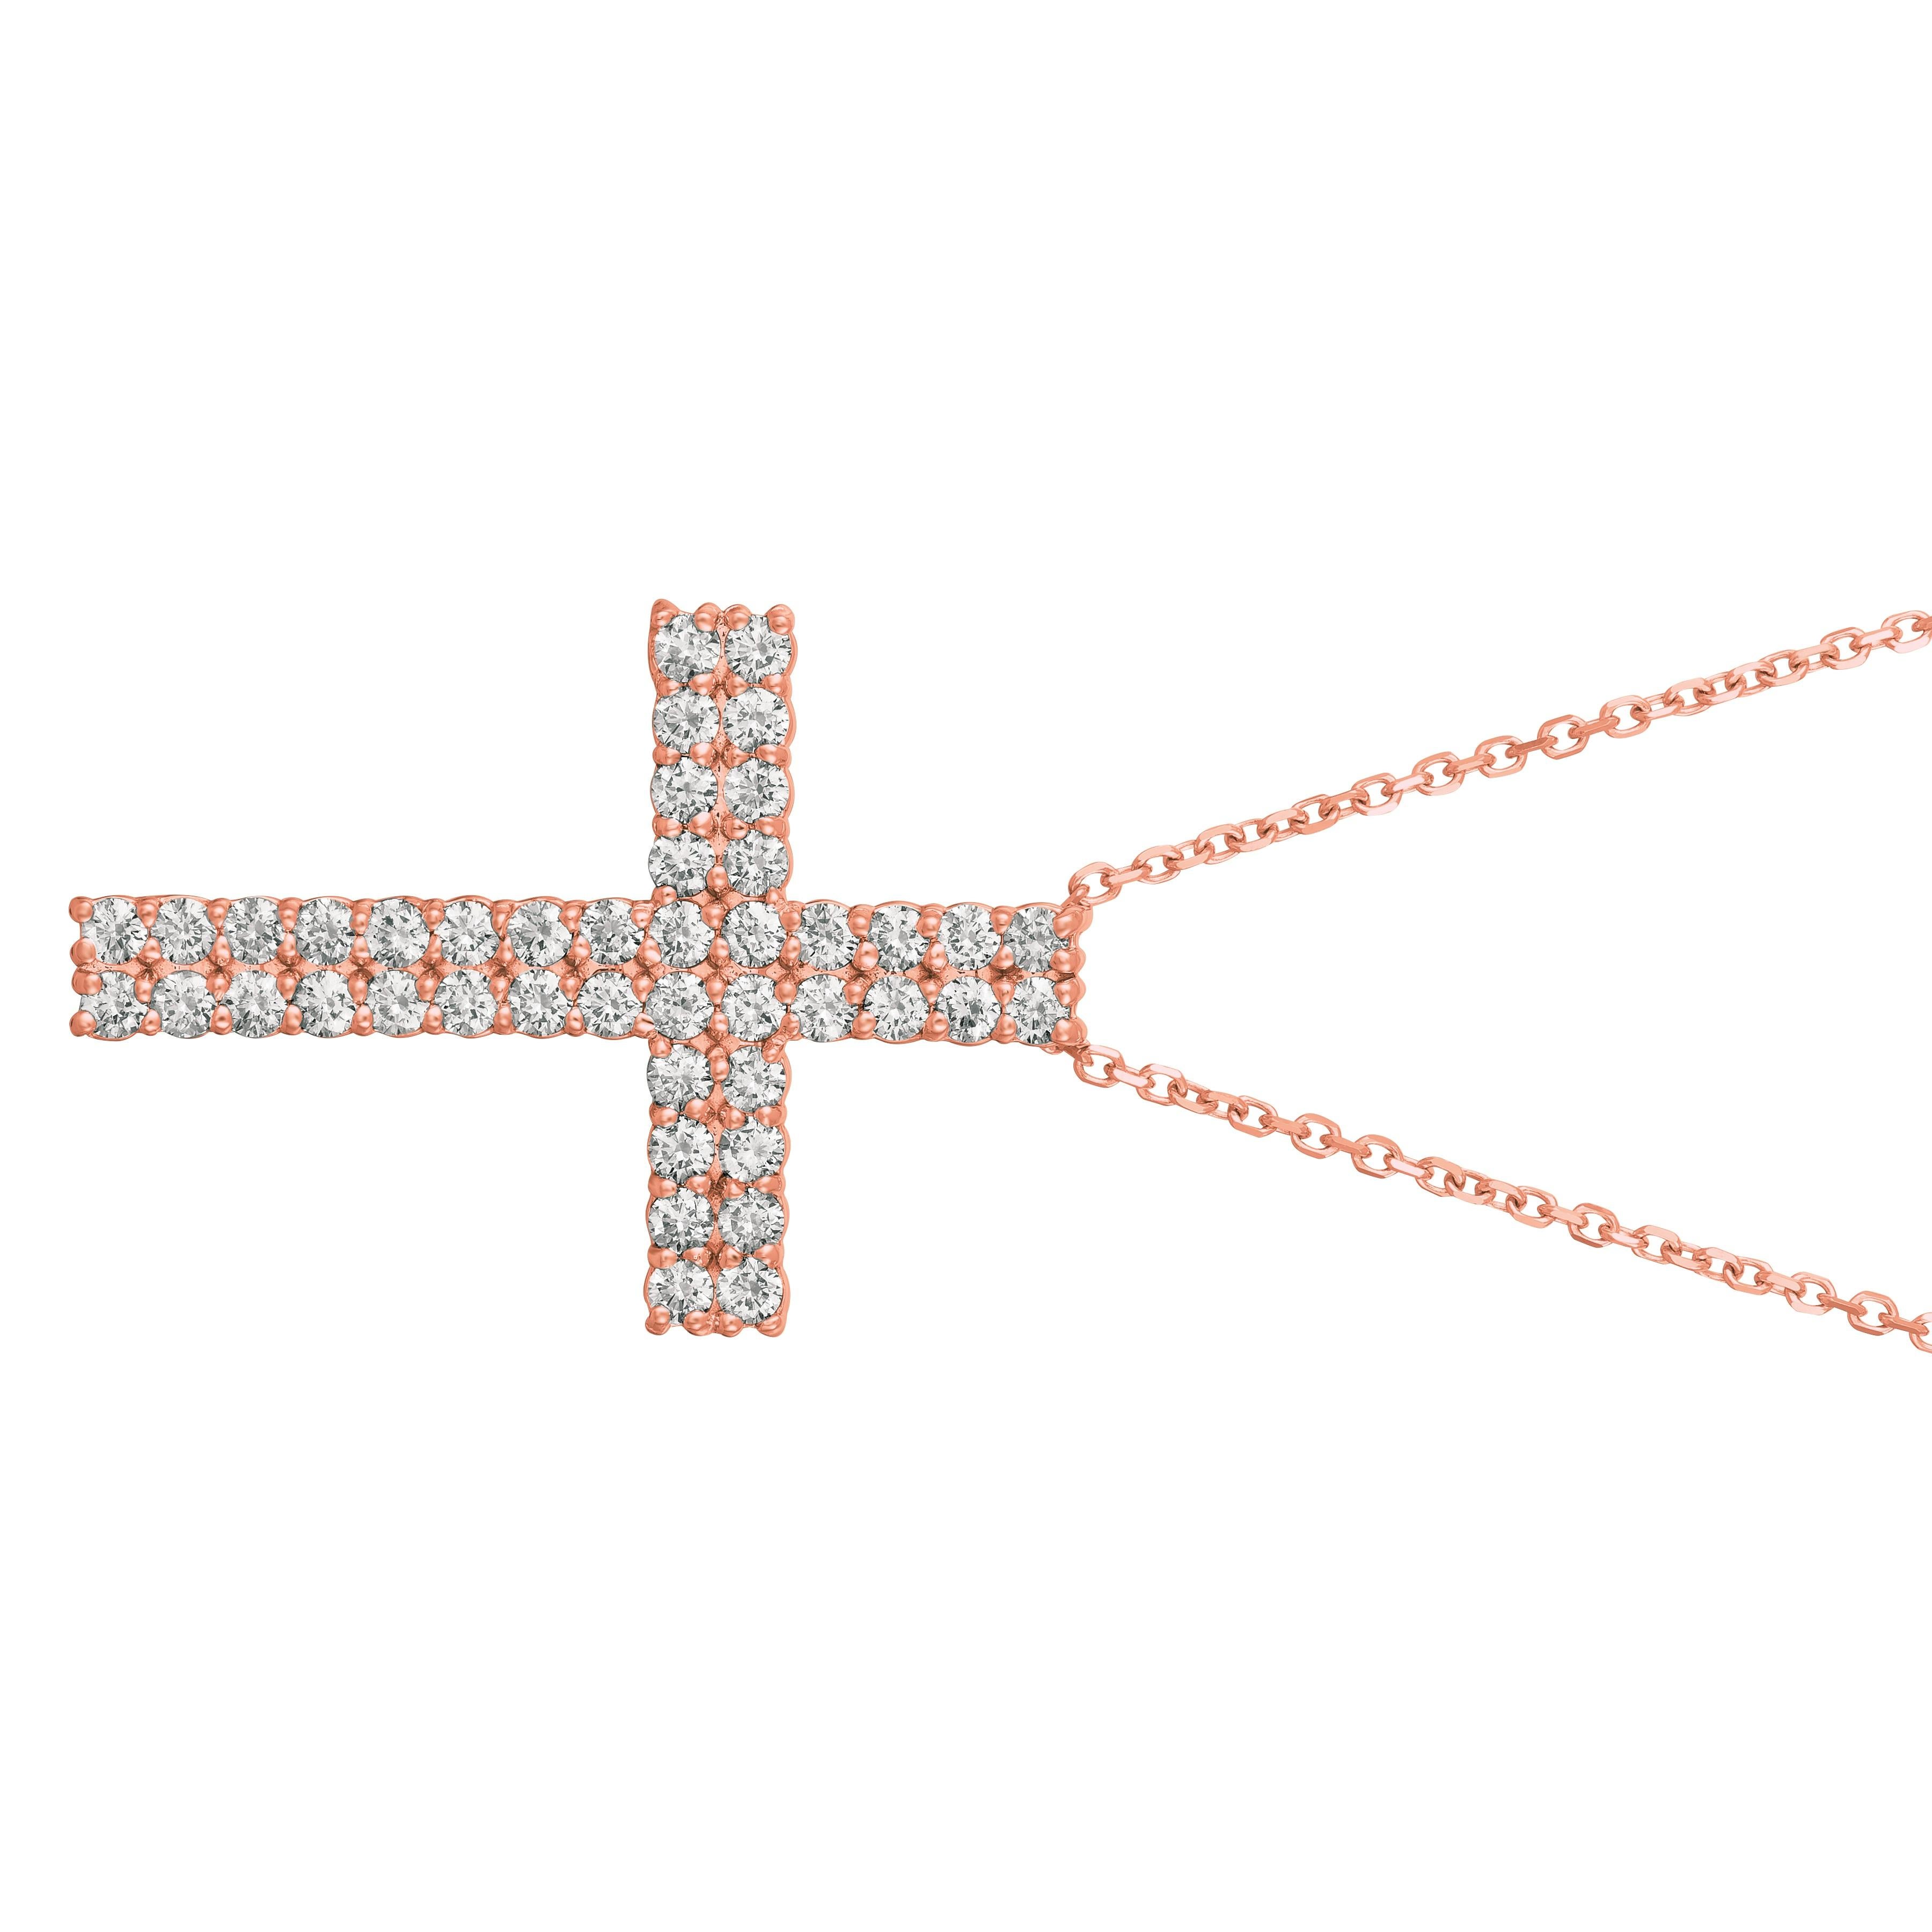 1.75 Carat Natural Diamond Cross Pendant Necklace 14K Rose Gold G SI 18'' chain

100% Natural Diamonds, Not Enhanced in any way Round Cut Diamond Necklace
1.75CT
G-H
SI
14K Rose Gold Pave style 5.8 gram
1 5/16 inch in height, 15/16 inch in width
44